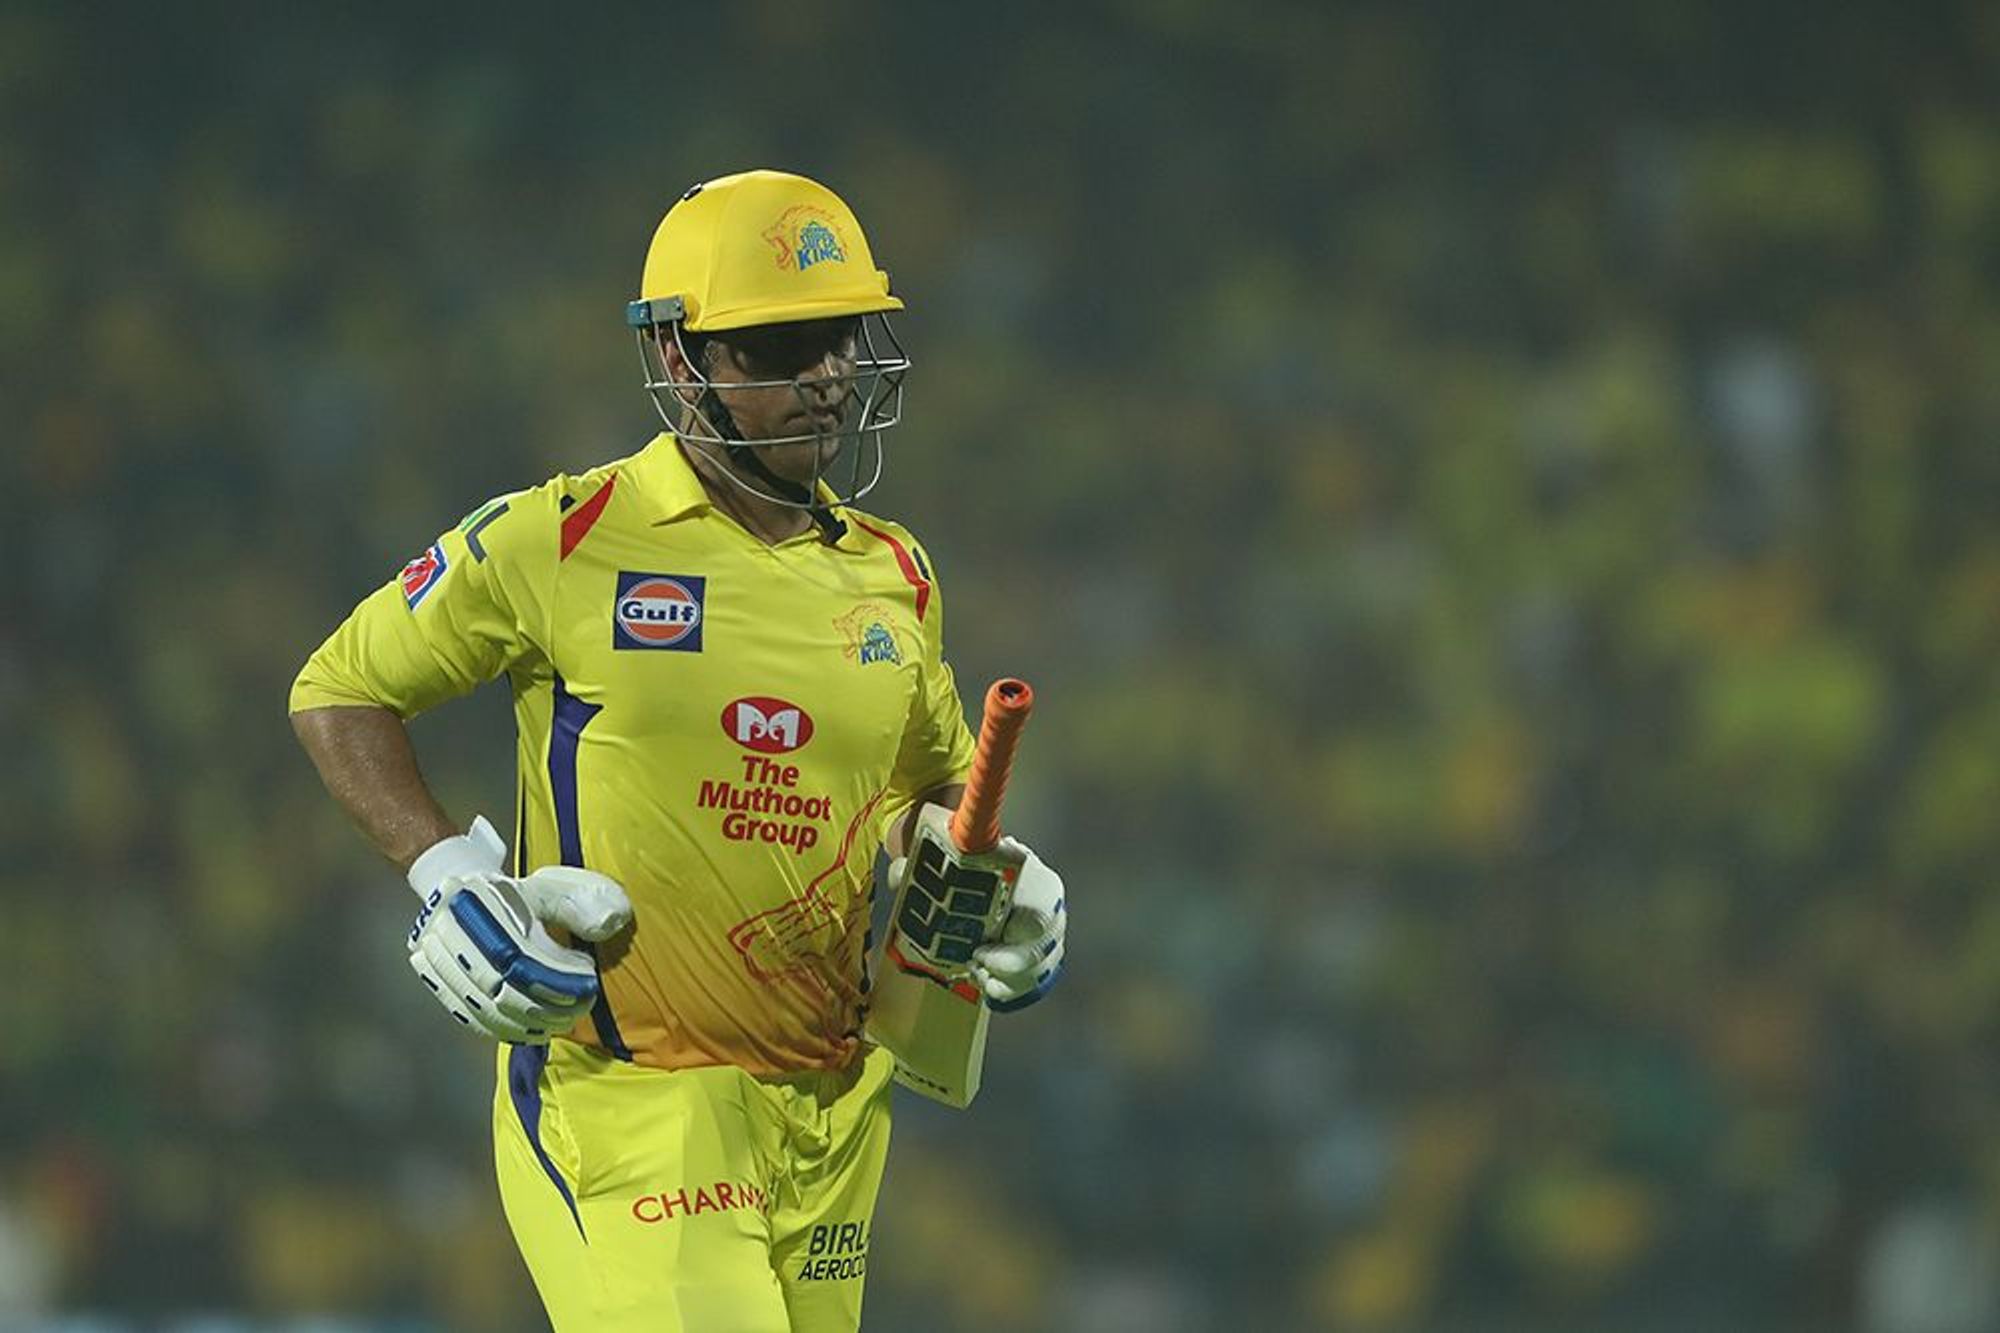 IPL 2020 | My suggestion to Dhoni will be to increase his exercise drills and batting time, insists Javed Miandad